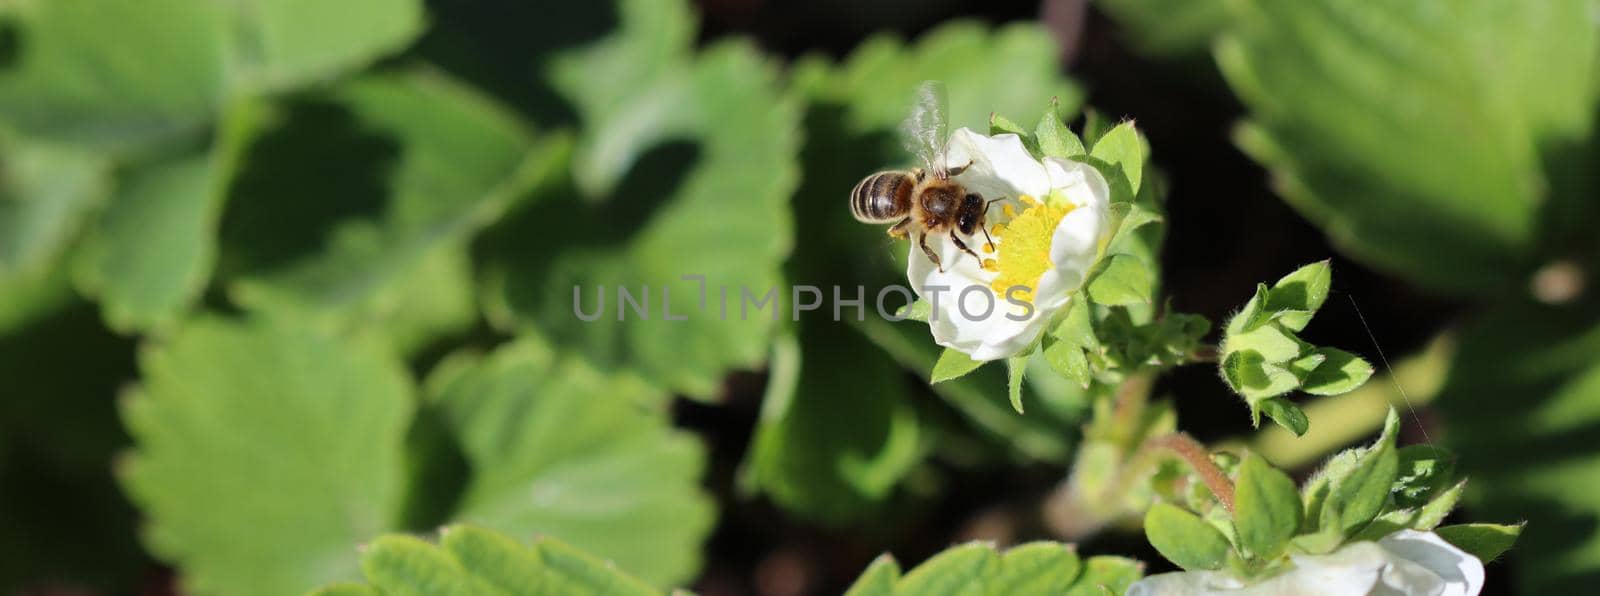 Blooming strawberry with flying bee on an organic farm by Olayola